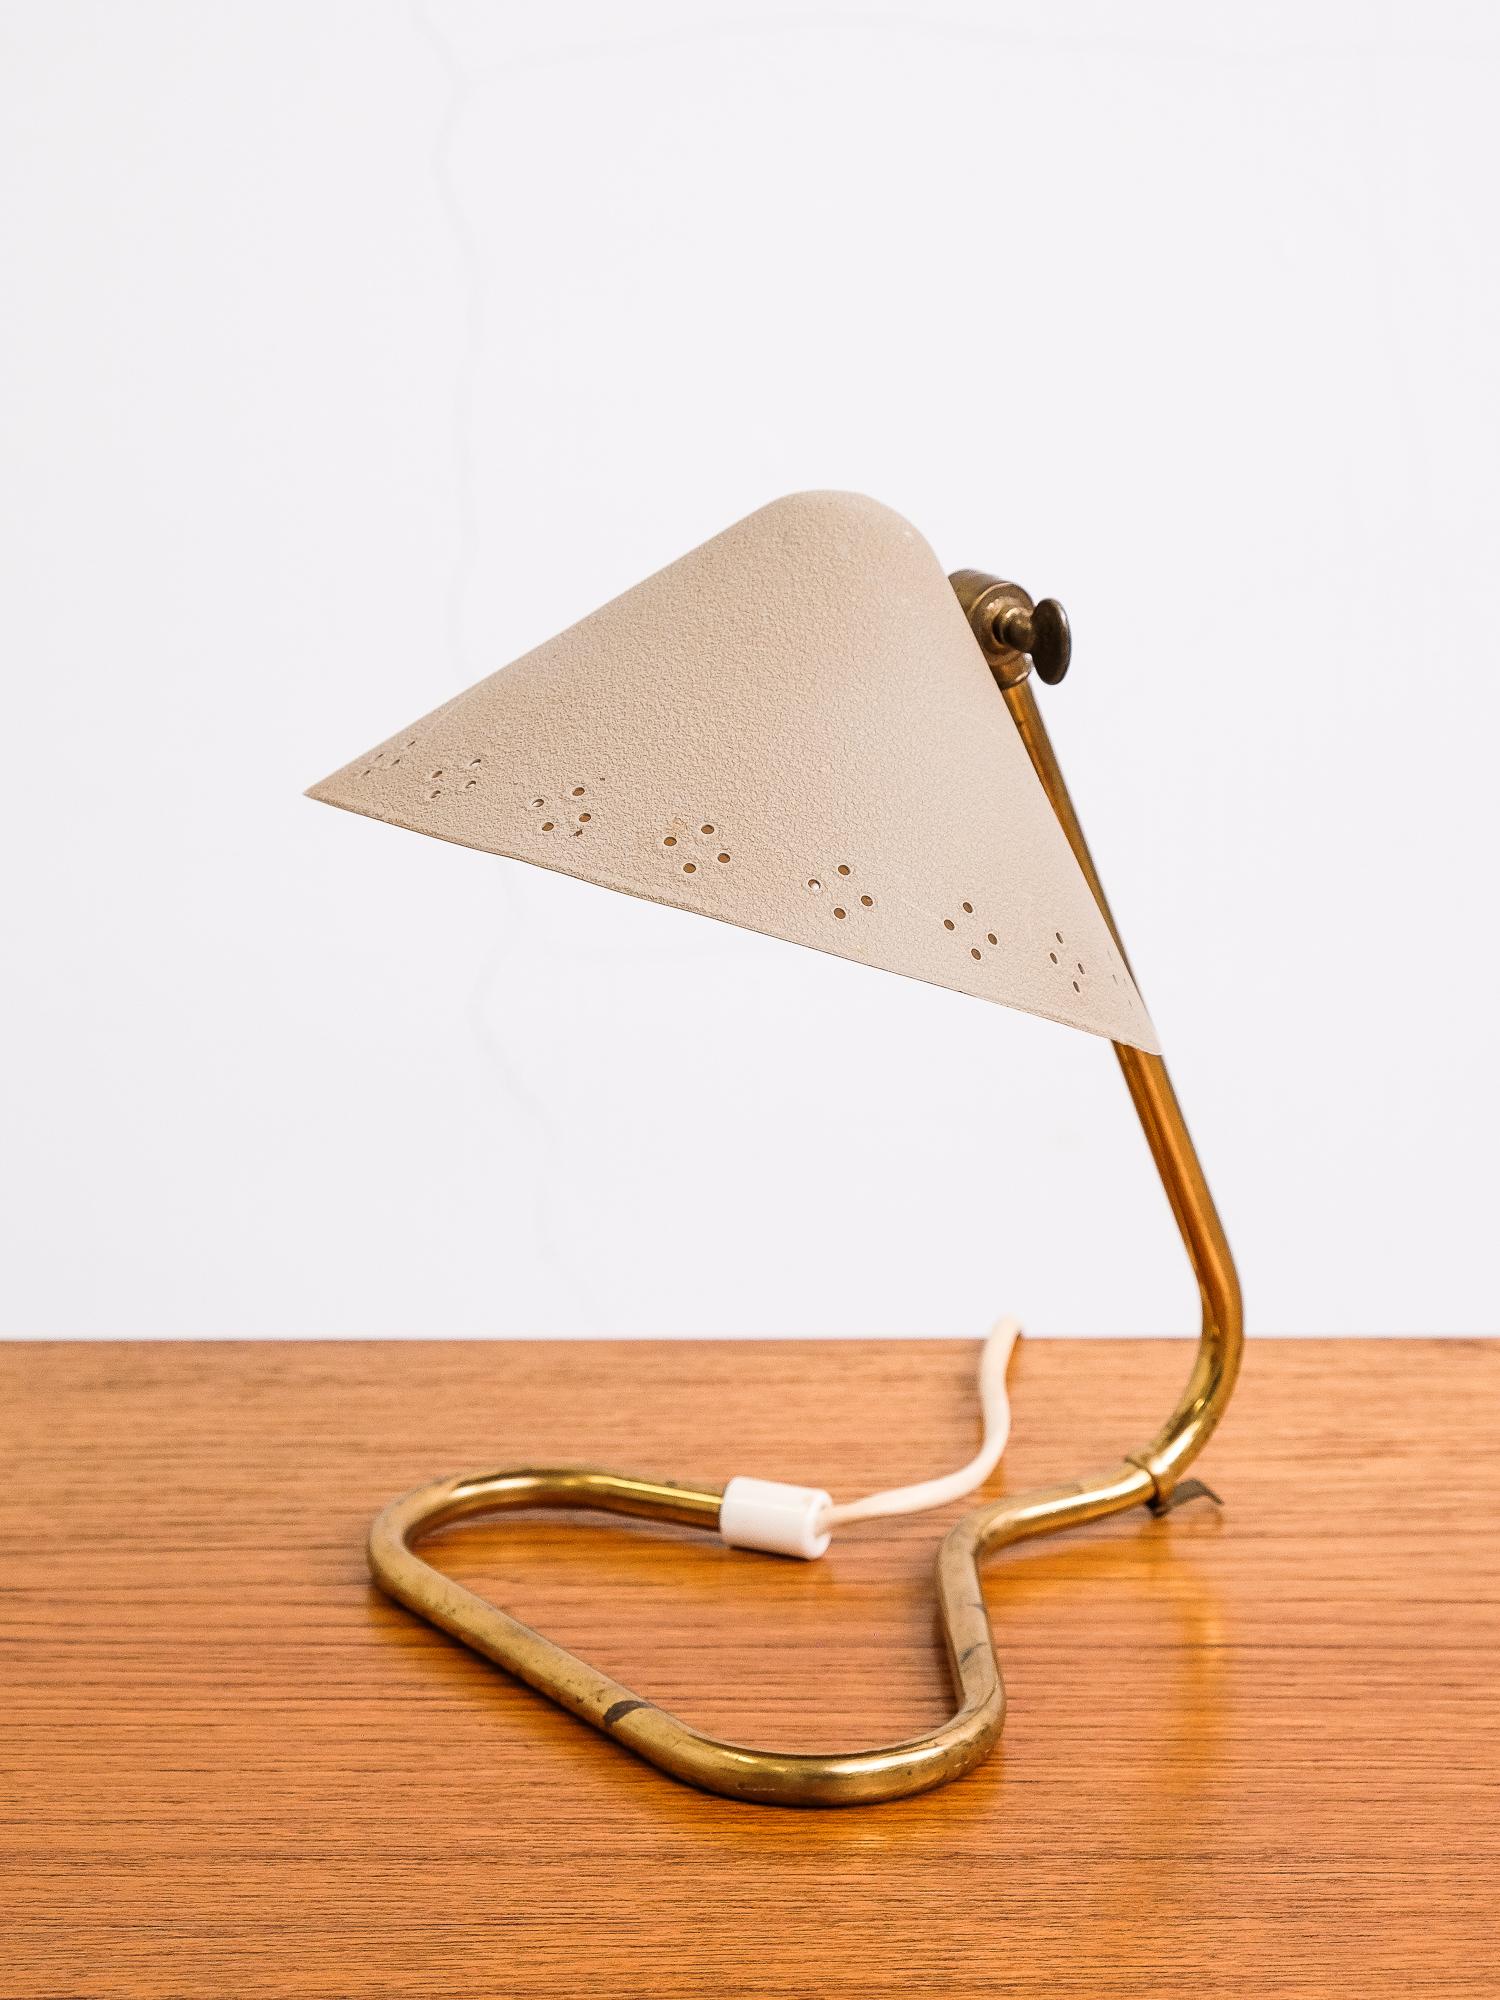 Rare and beautifully designed Swedish table lamp designed by Erik Wärnå and produced by Rydahls.

The lovely designed foot is made of brass and the shade is made of aluminum.
Lampshade can be pointed up or down, the holes in the shade have a nice